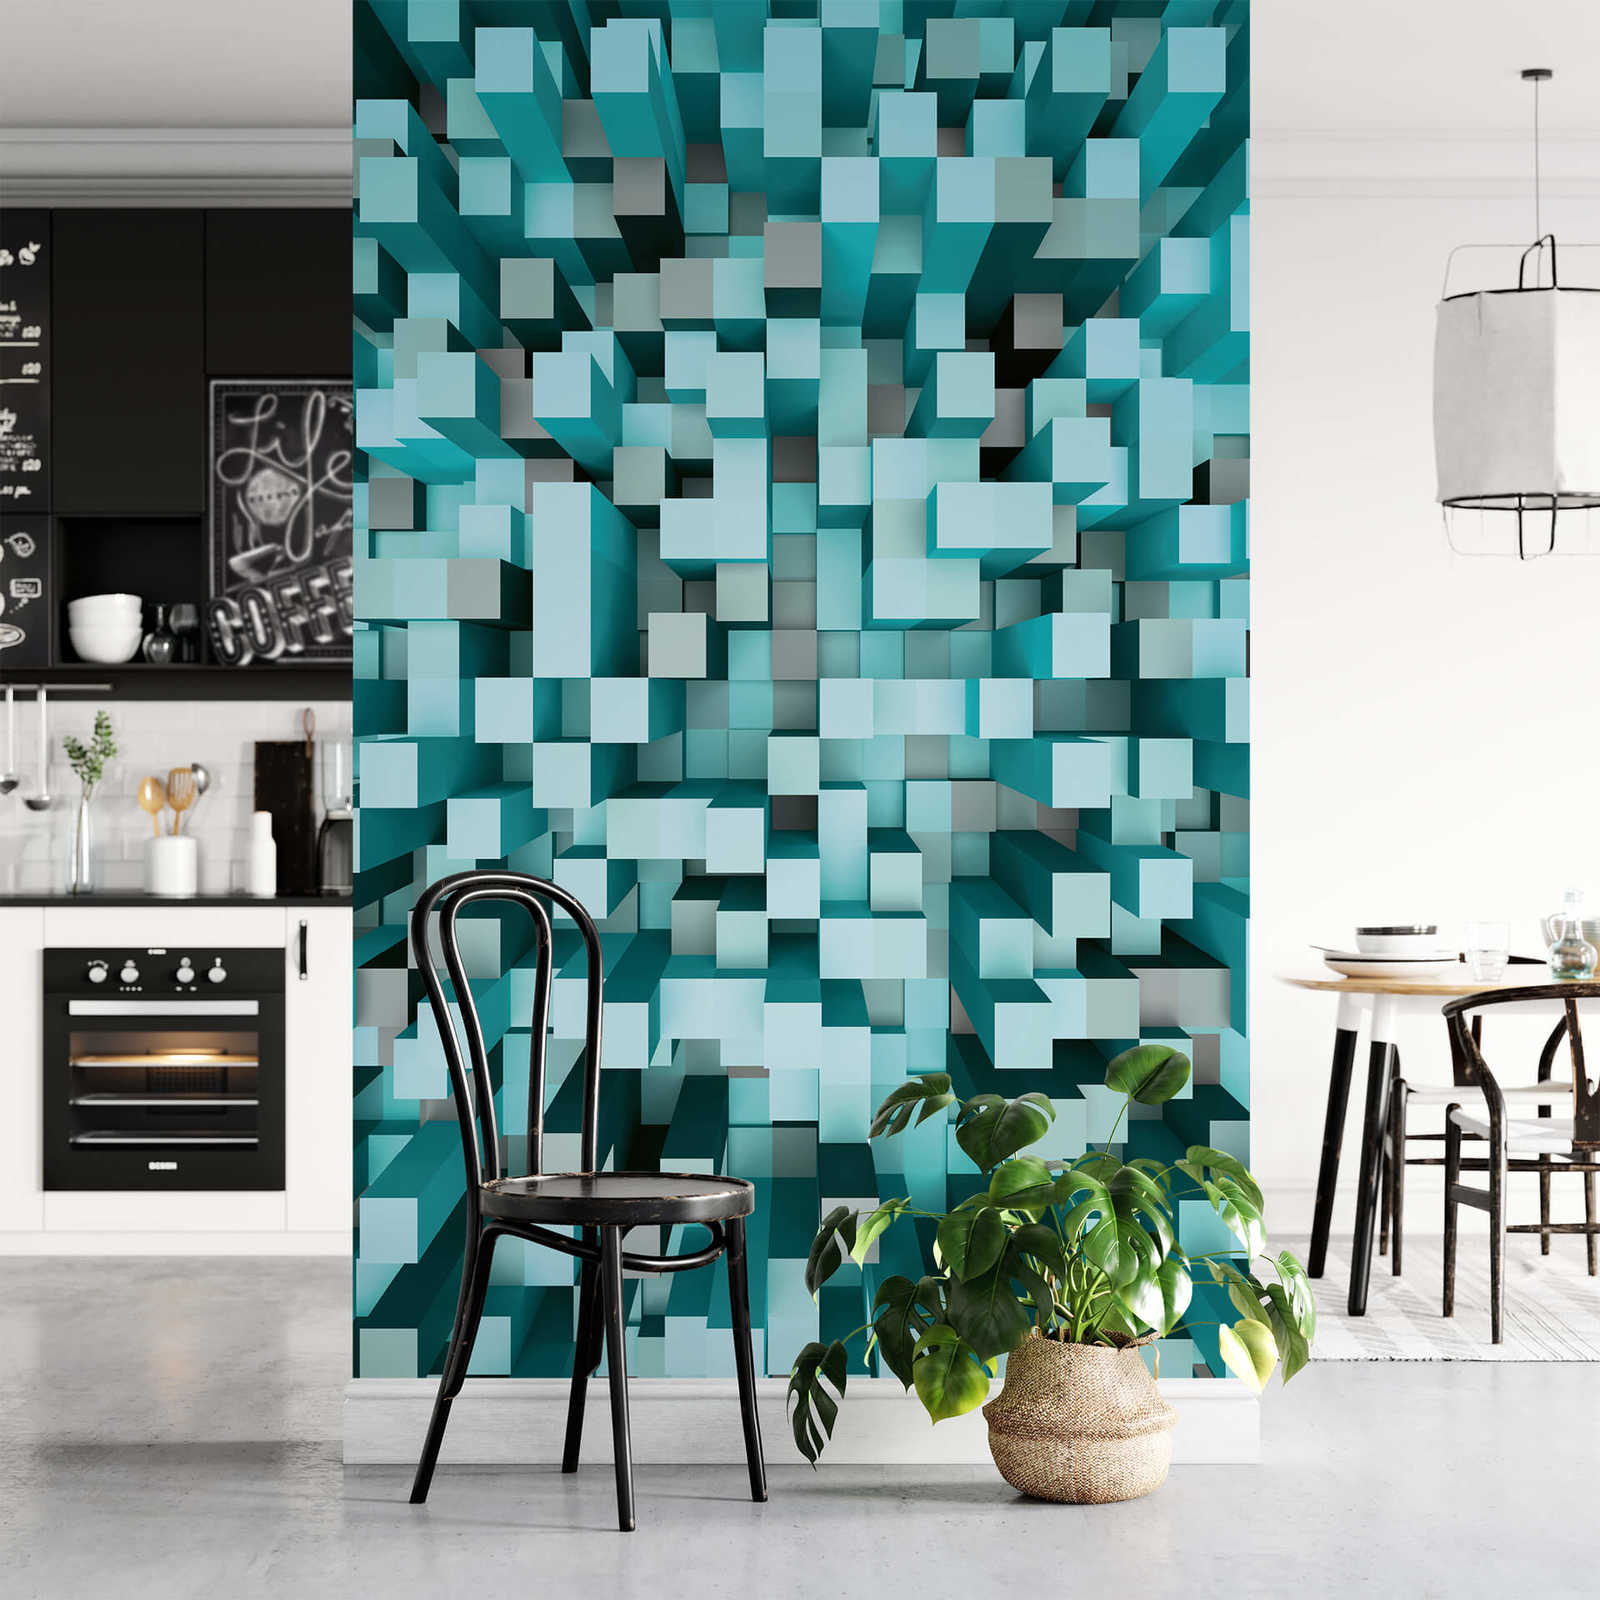             3D Photo wallpaper with cube pattern, portrait format - turquoise
        